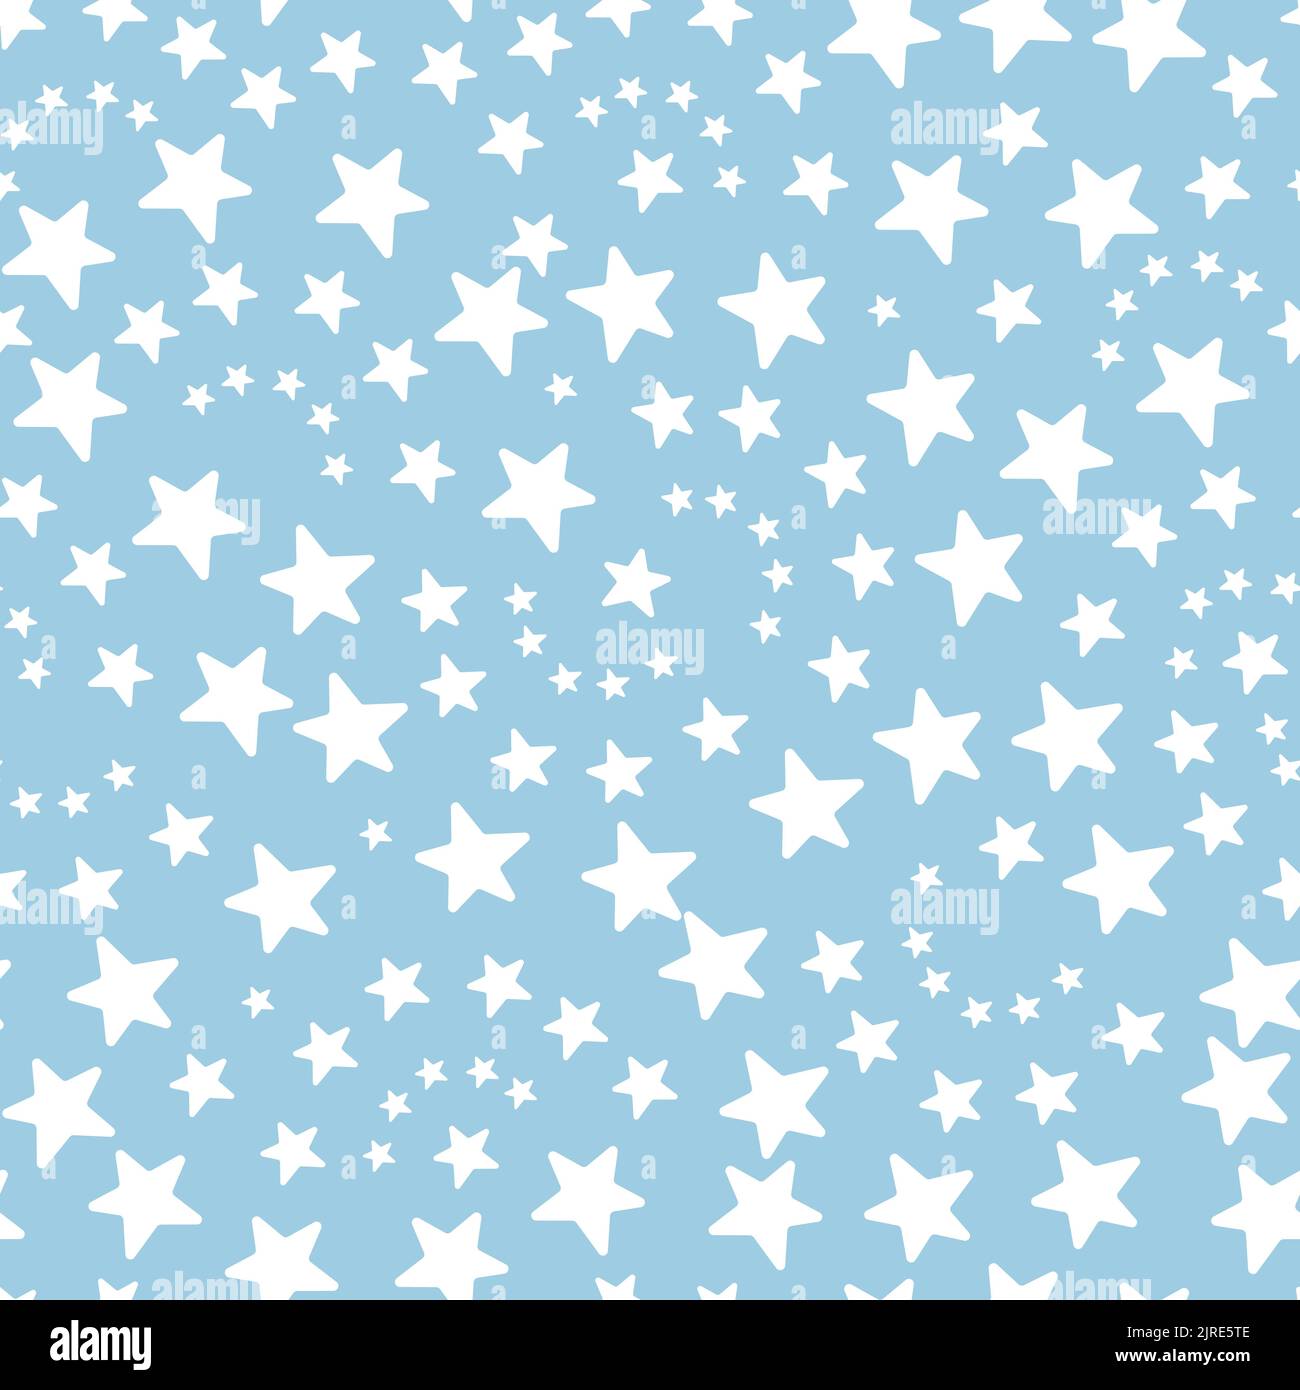 Stars. Seamless vector pattern. Isolated blue background. Flat style. Endless ornament of white stars. Delicate background. Stock Vector